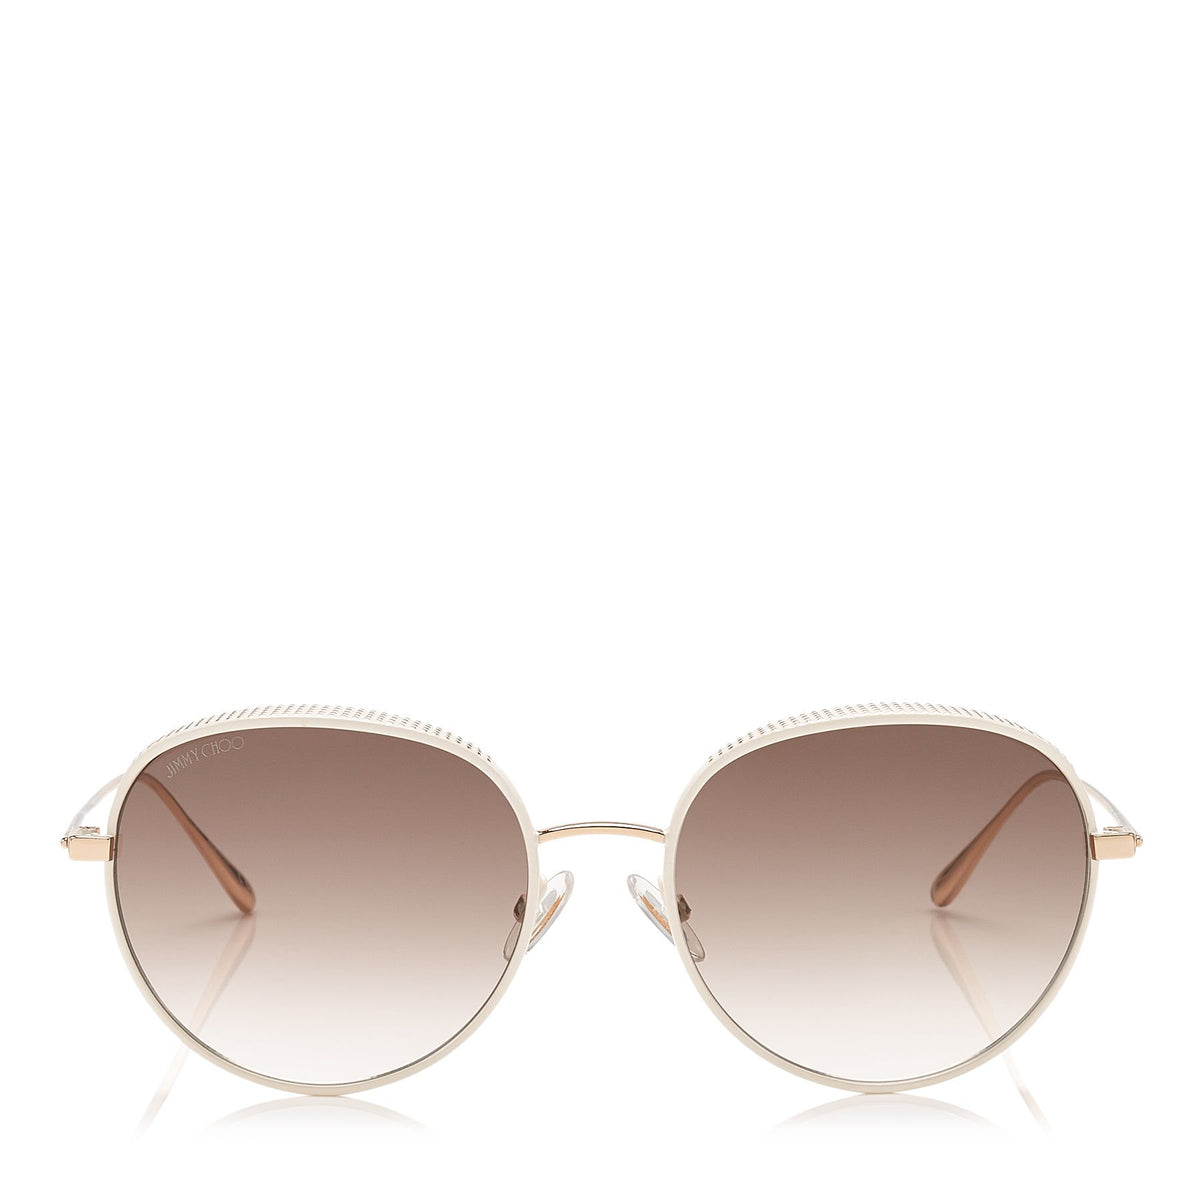 JIMMY CHOO Ello White and Gold Metal Framed Sunglasses with Micro Studs Detailing ITEM NO. ELLOS56EONR